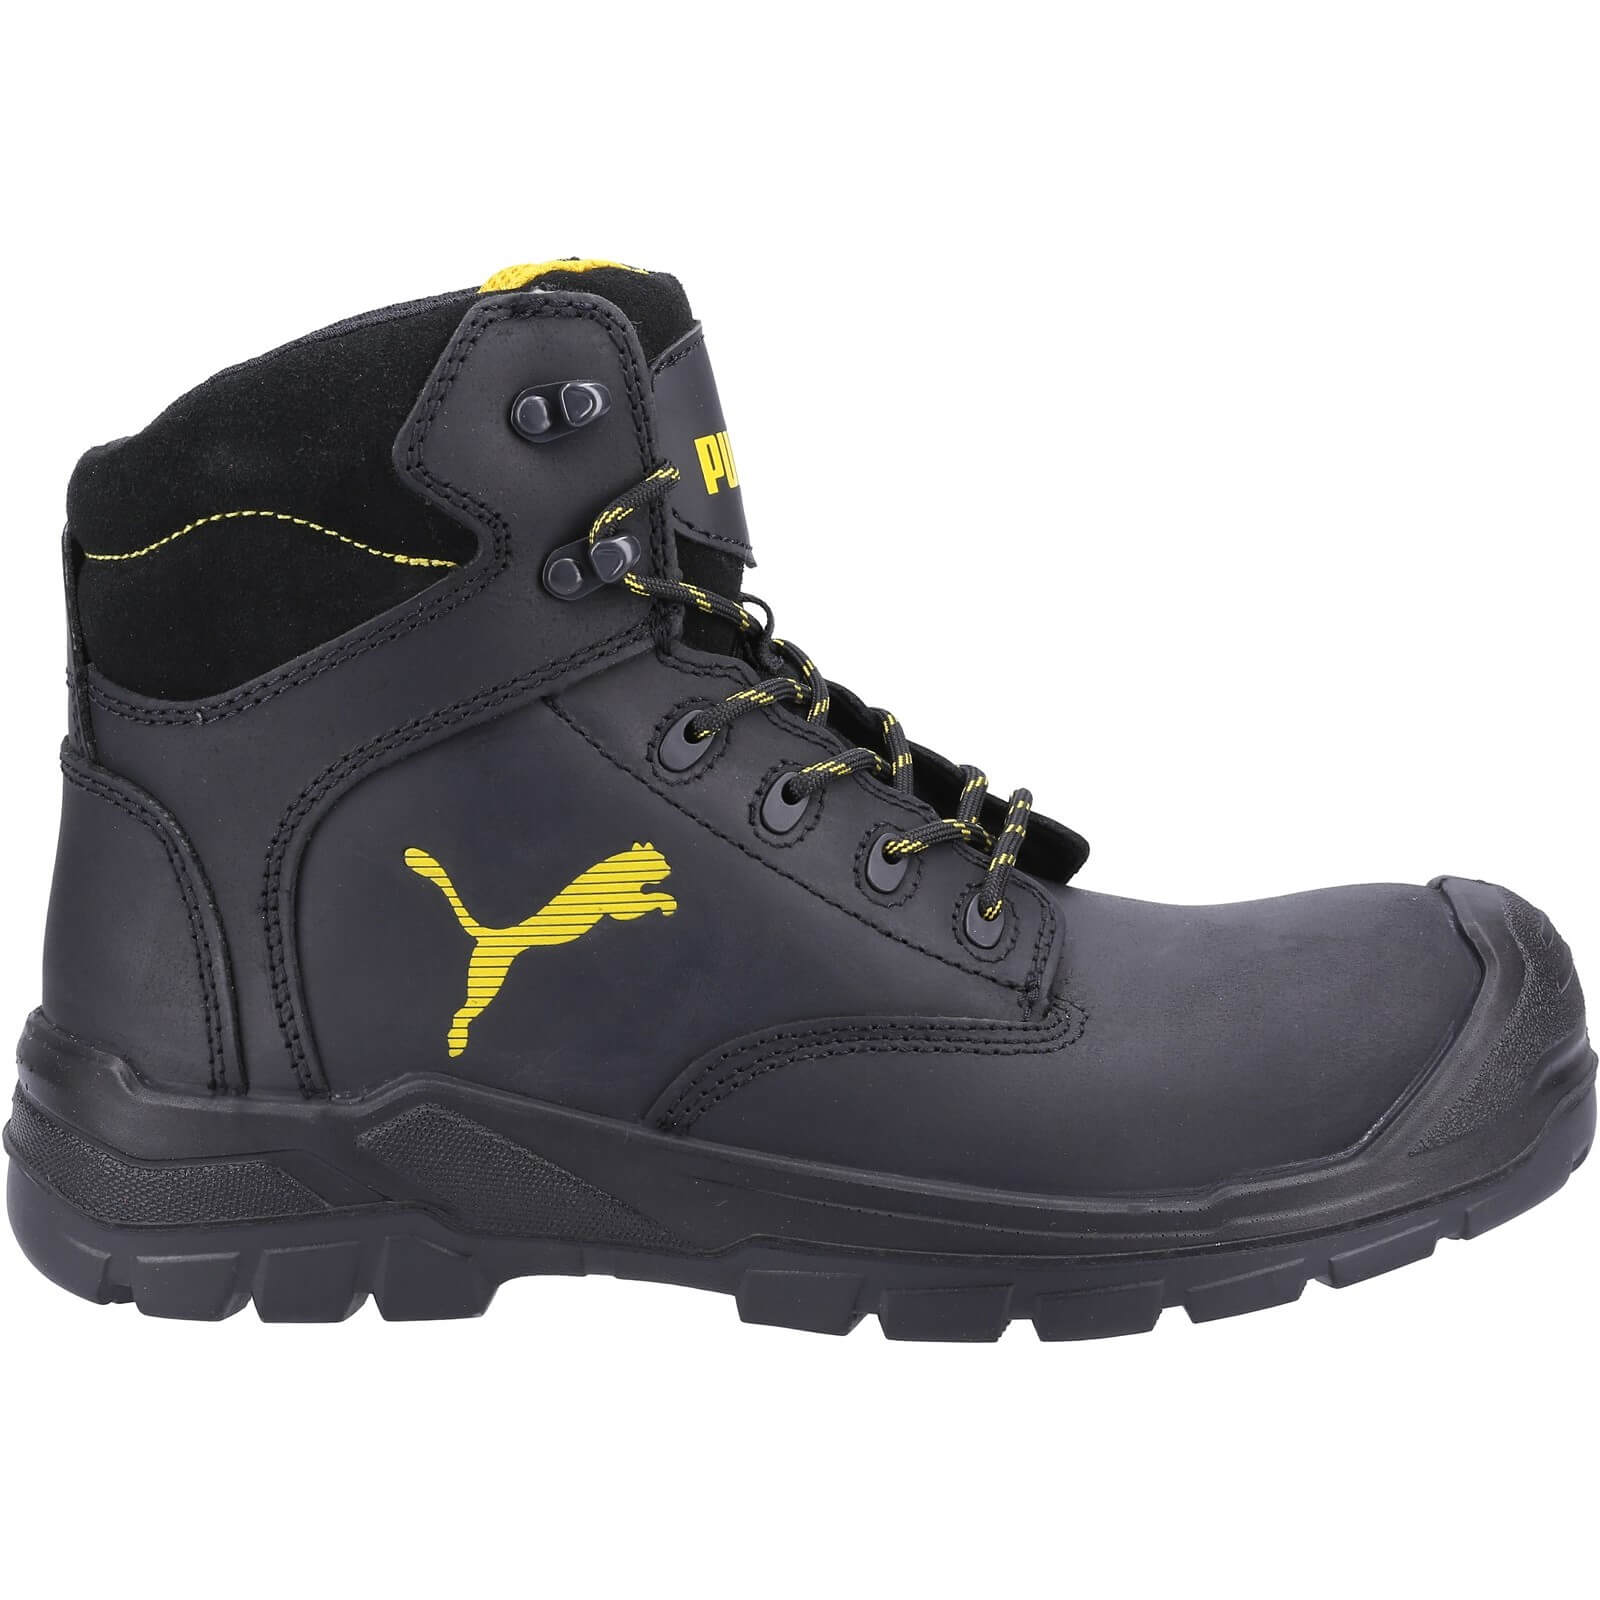 Boots S3 Borneo Safety Puma – Mid Safety